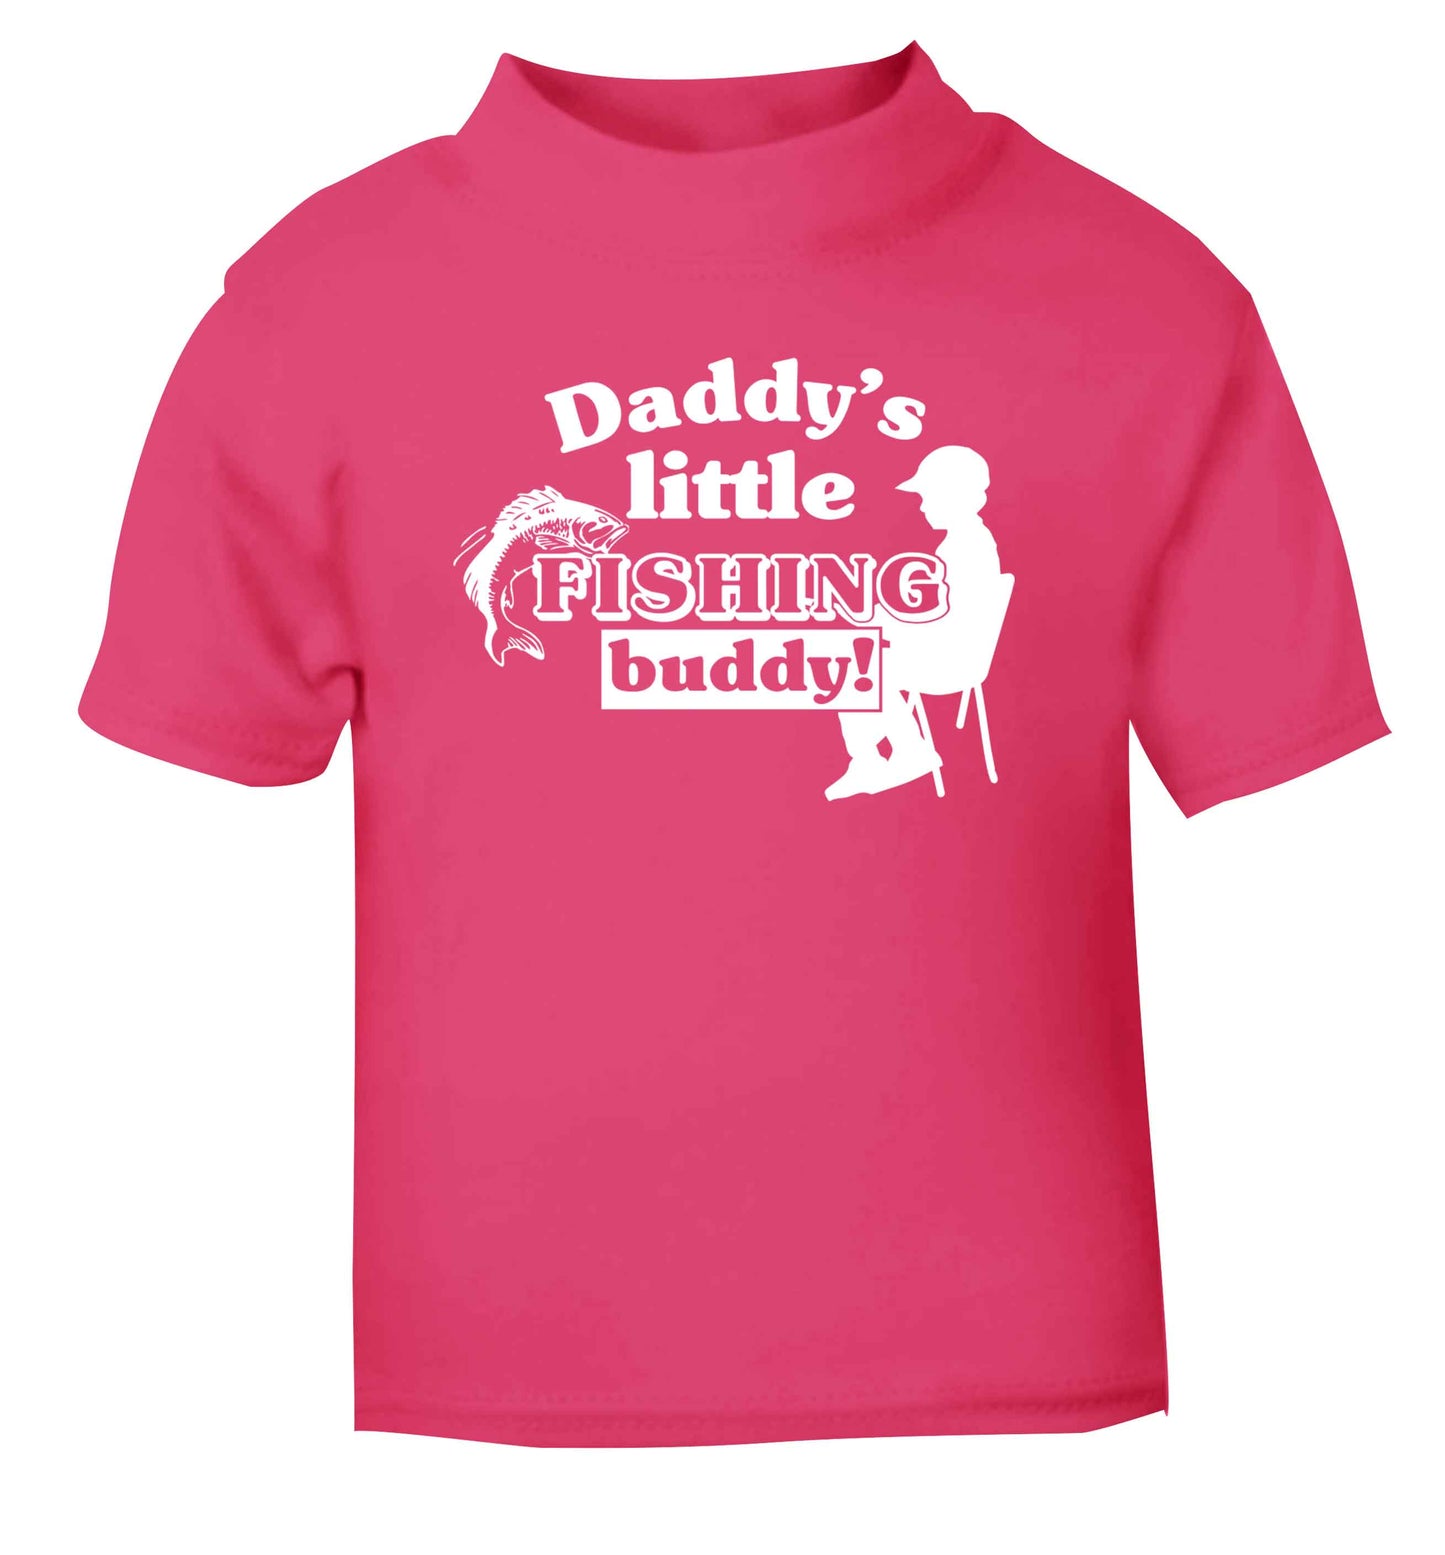 Daddy's little fishing buddy pink Baby Toddler Tshirt 2 Years